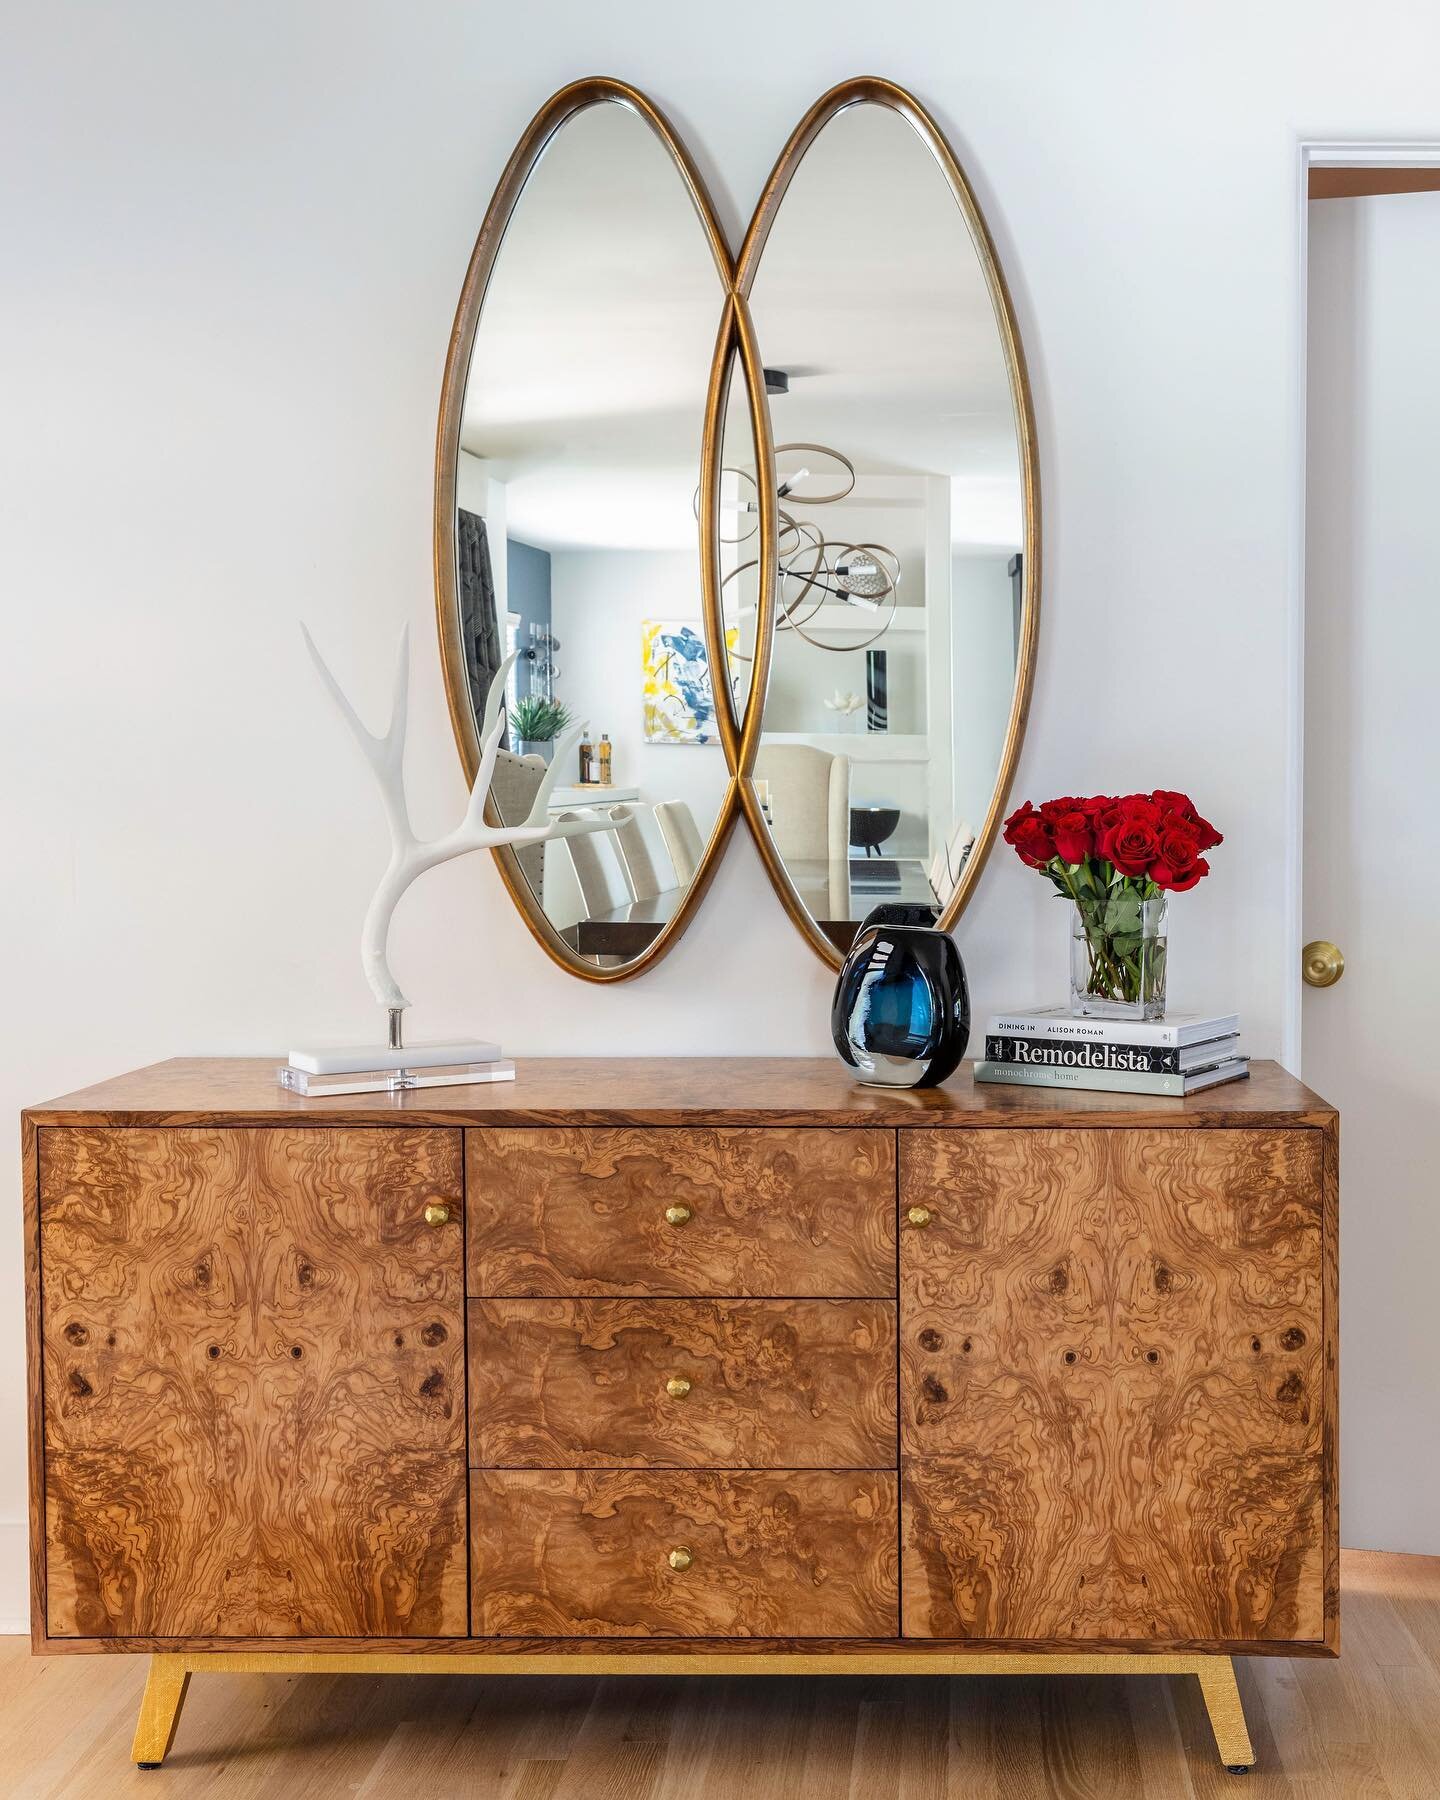 Welcome your guests in style! This foyer says &ldquo;Welcome! We are cool stylish people but also casual and warm. Kick off your shoes and Make yourself at home.&rdquo; The vintage mirror keeps it from feeling too precious. #designforlife
📸: @selavi